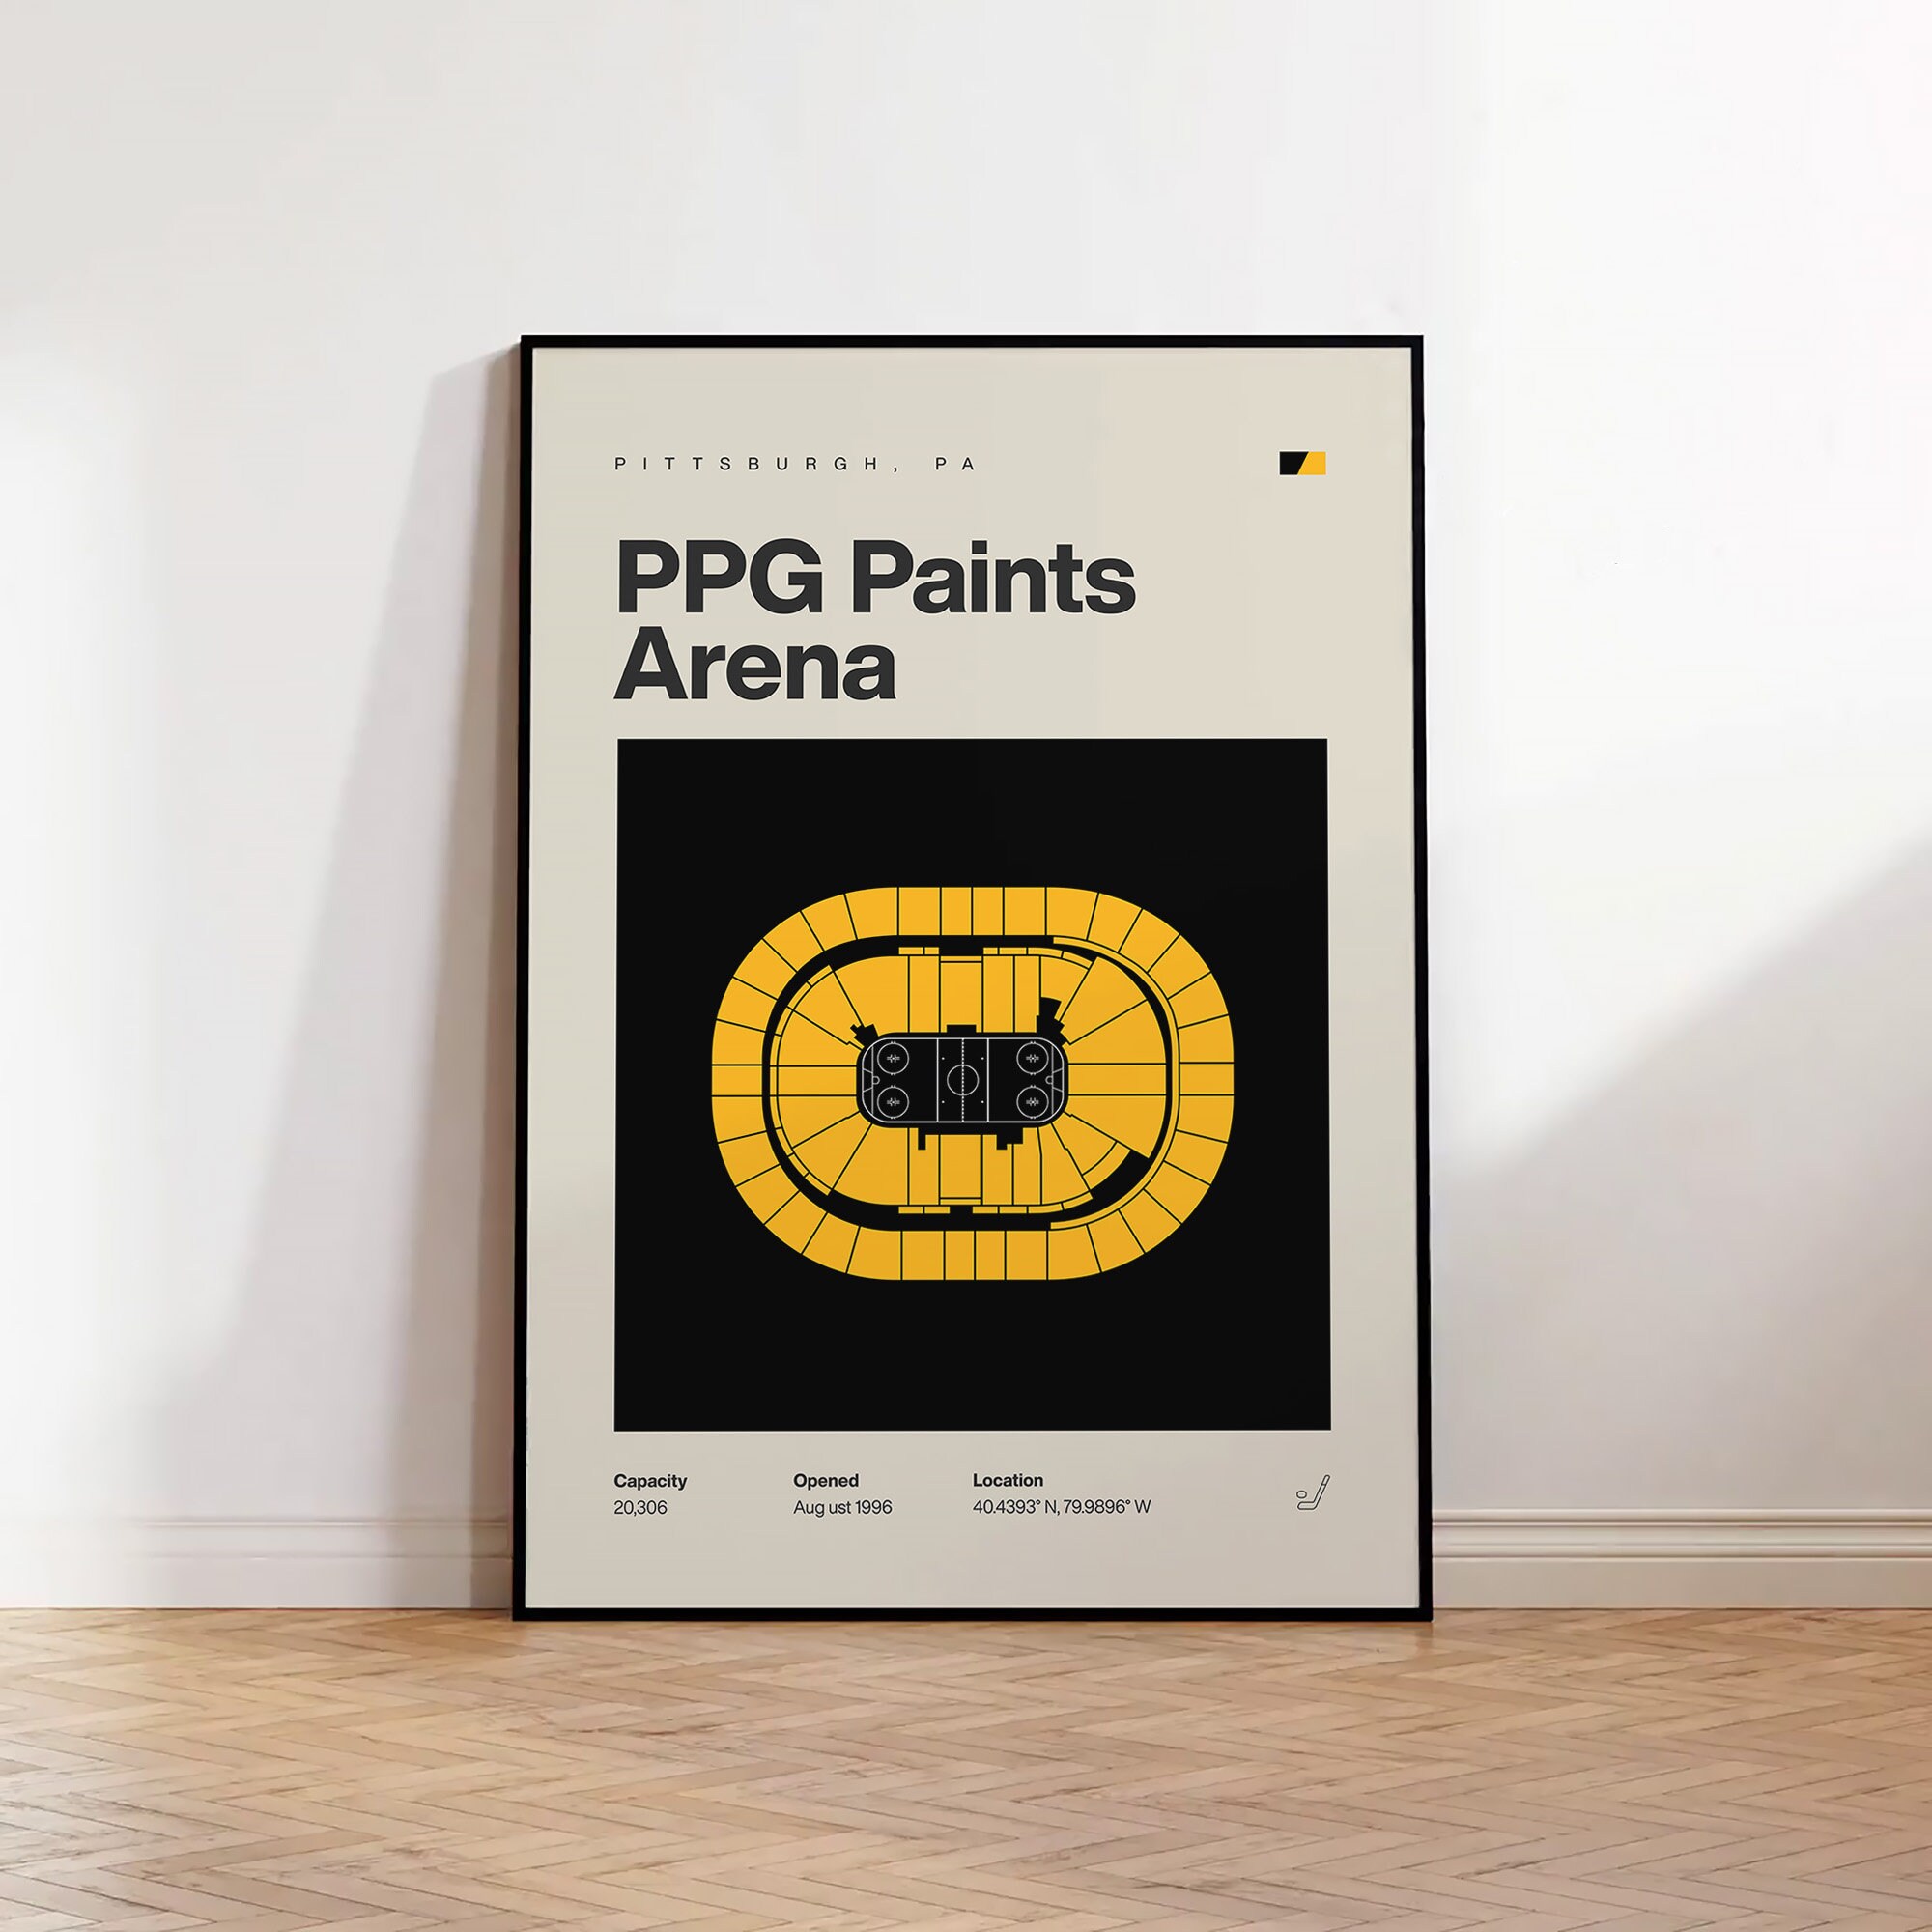 Penguins set to open PPG Paints Arena to 50% capacity